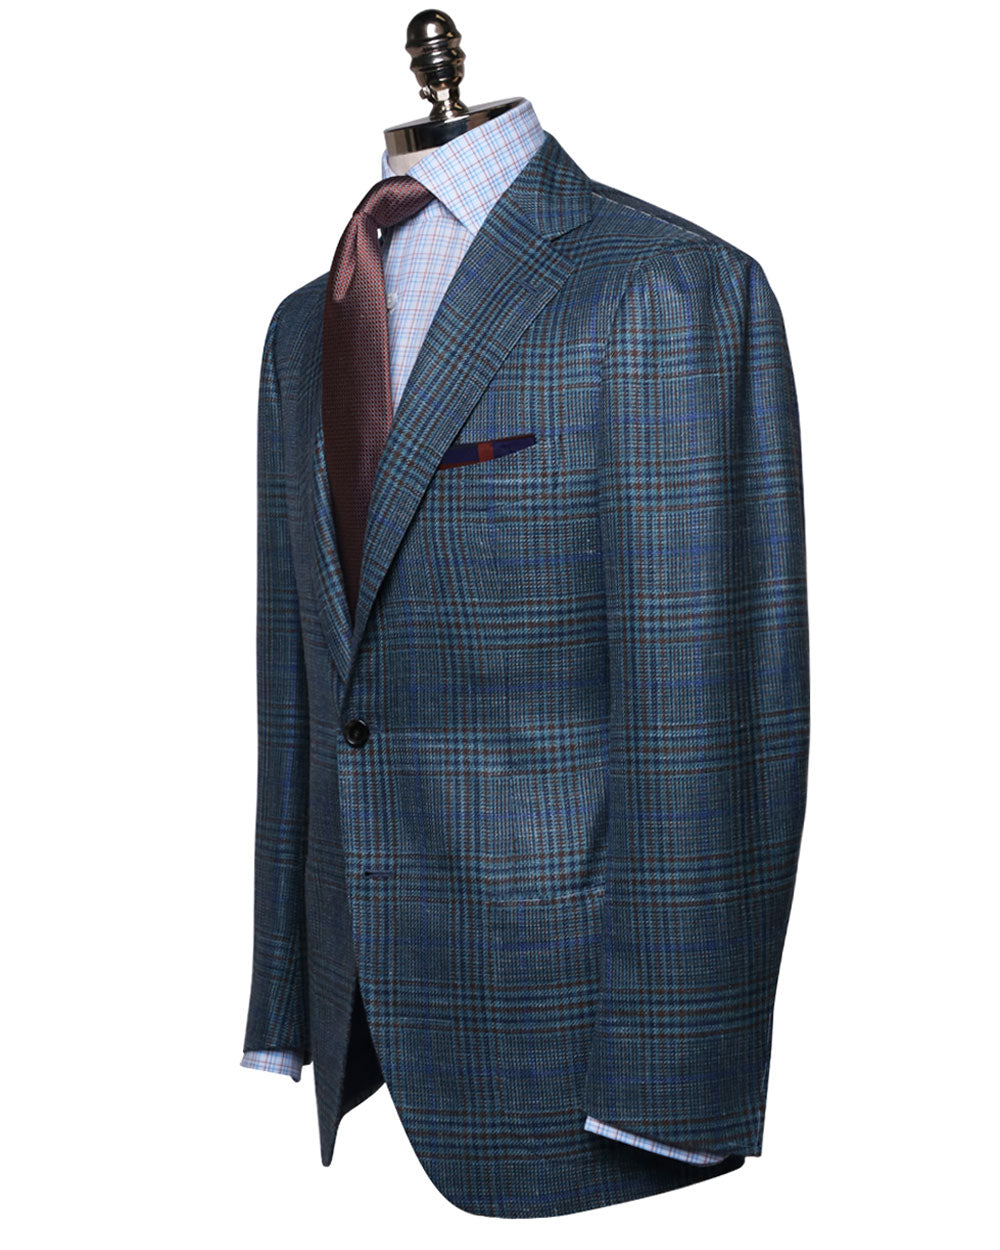 Teal and Blue Plaid Sportcoat